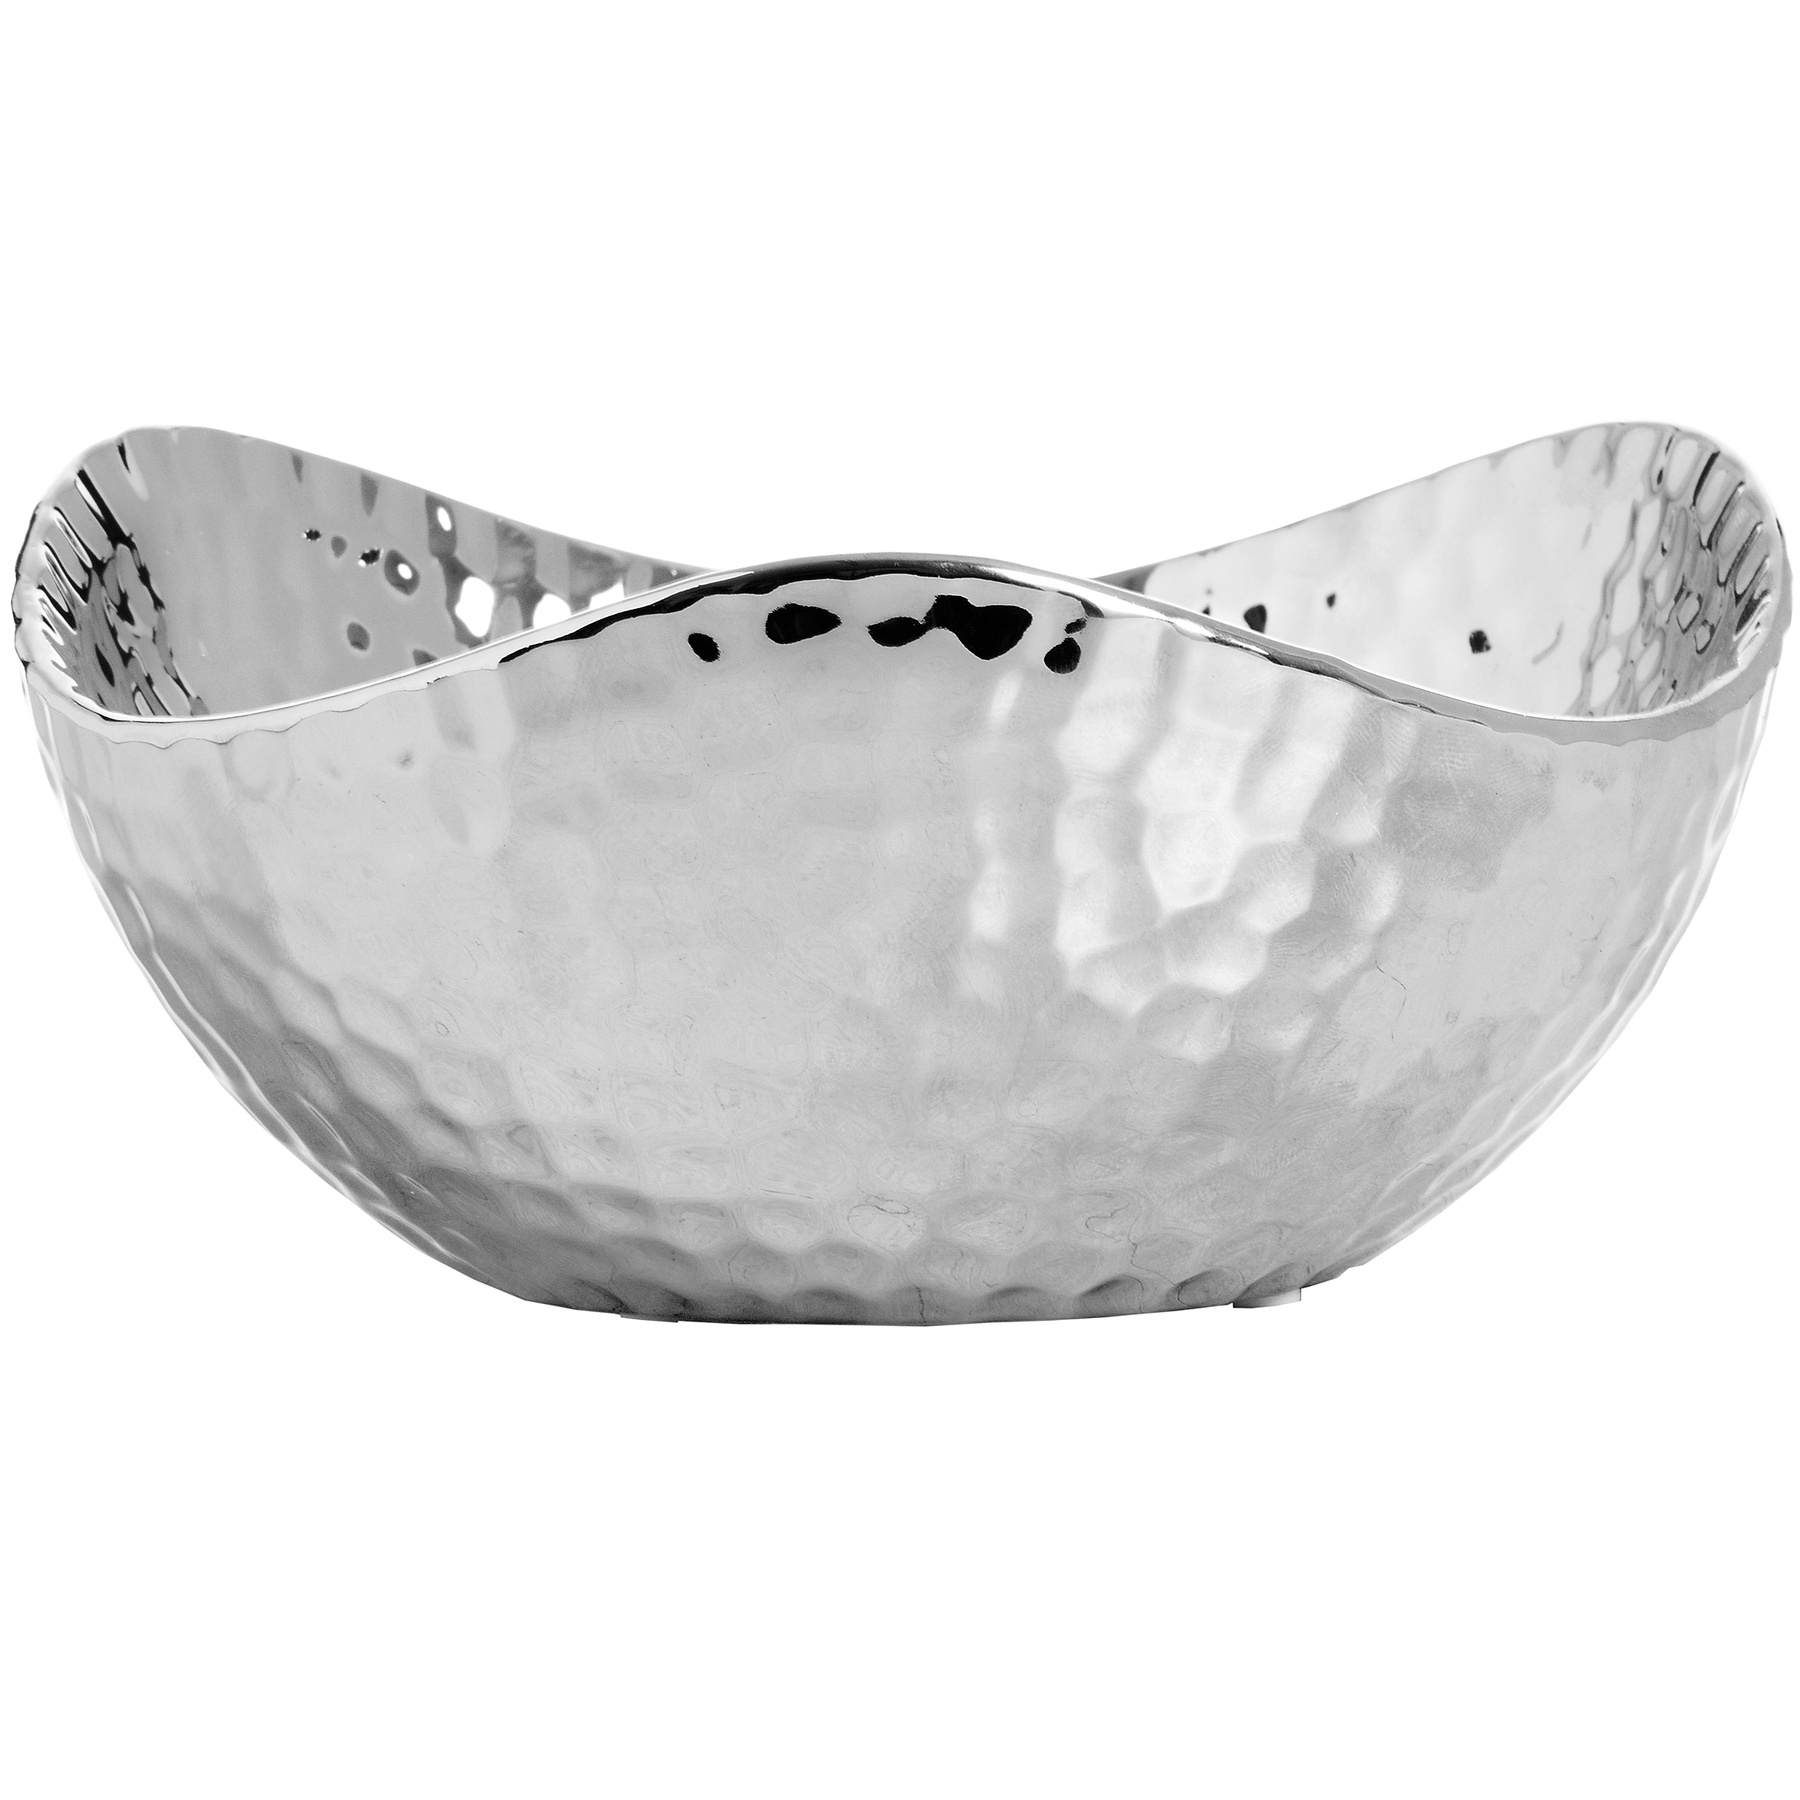 Silver Ceramic Dimple Effect Display Bowl - Small - Image 3